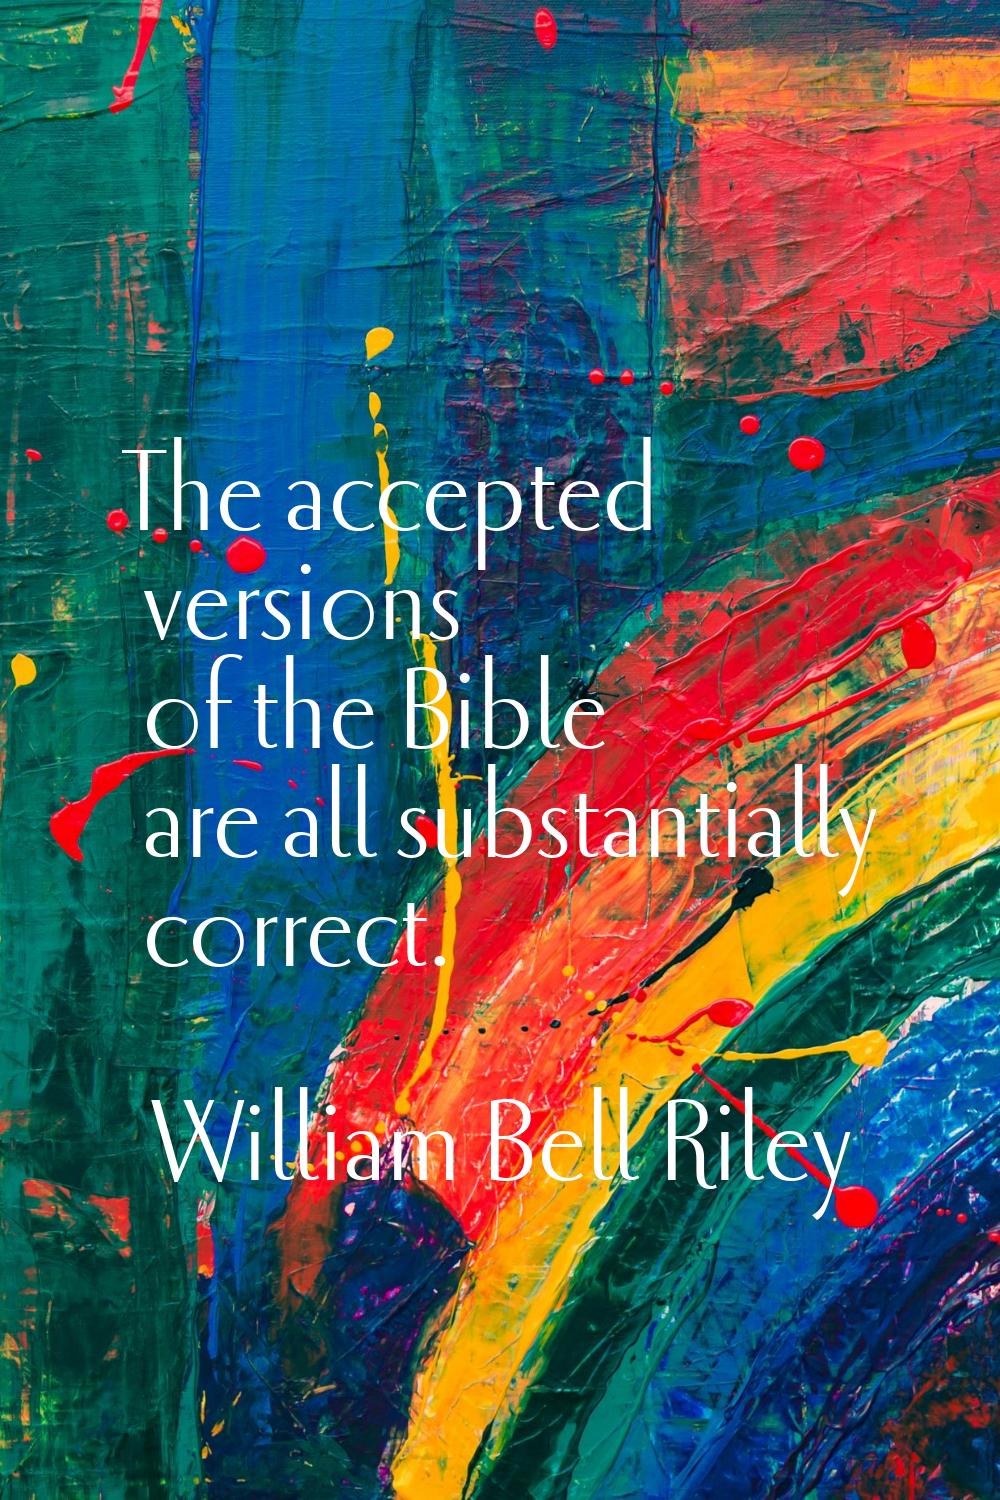 The accepted versions of the Bible are all substantially correct.